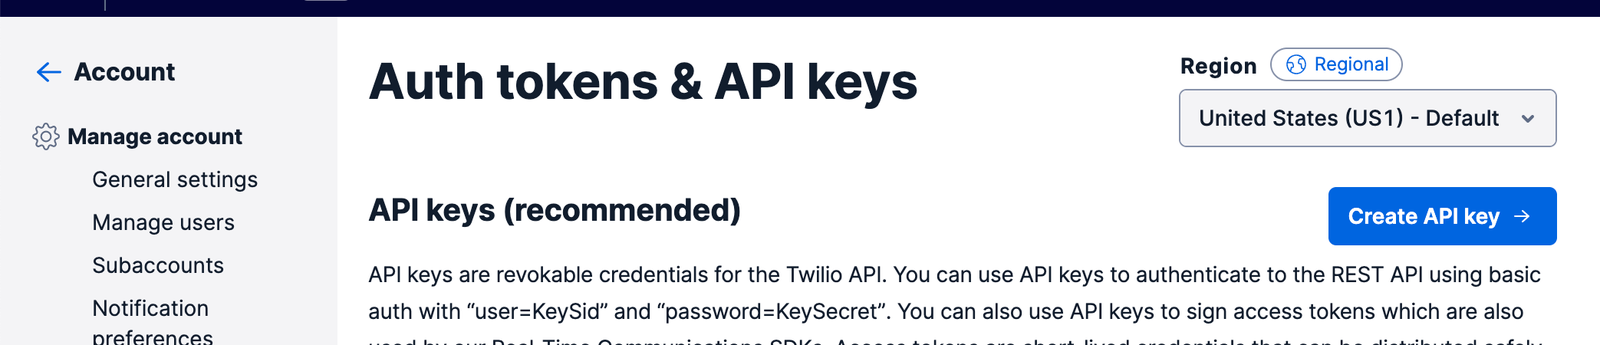 In the API Keys section of the Console, choose the US1 region to see all your API keys in that region.